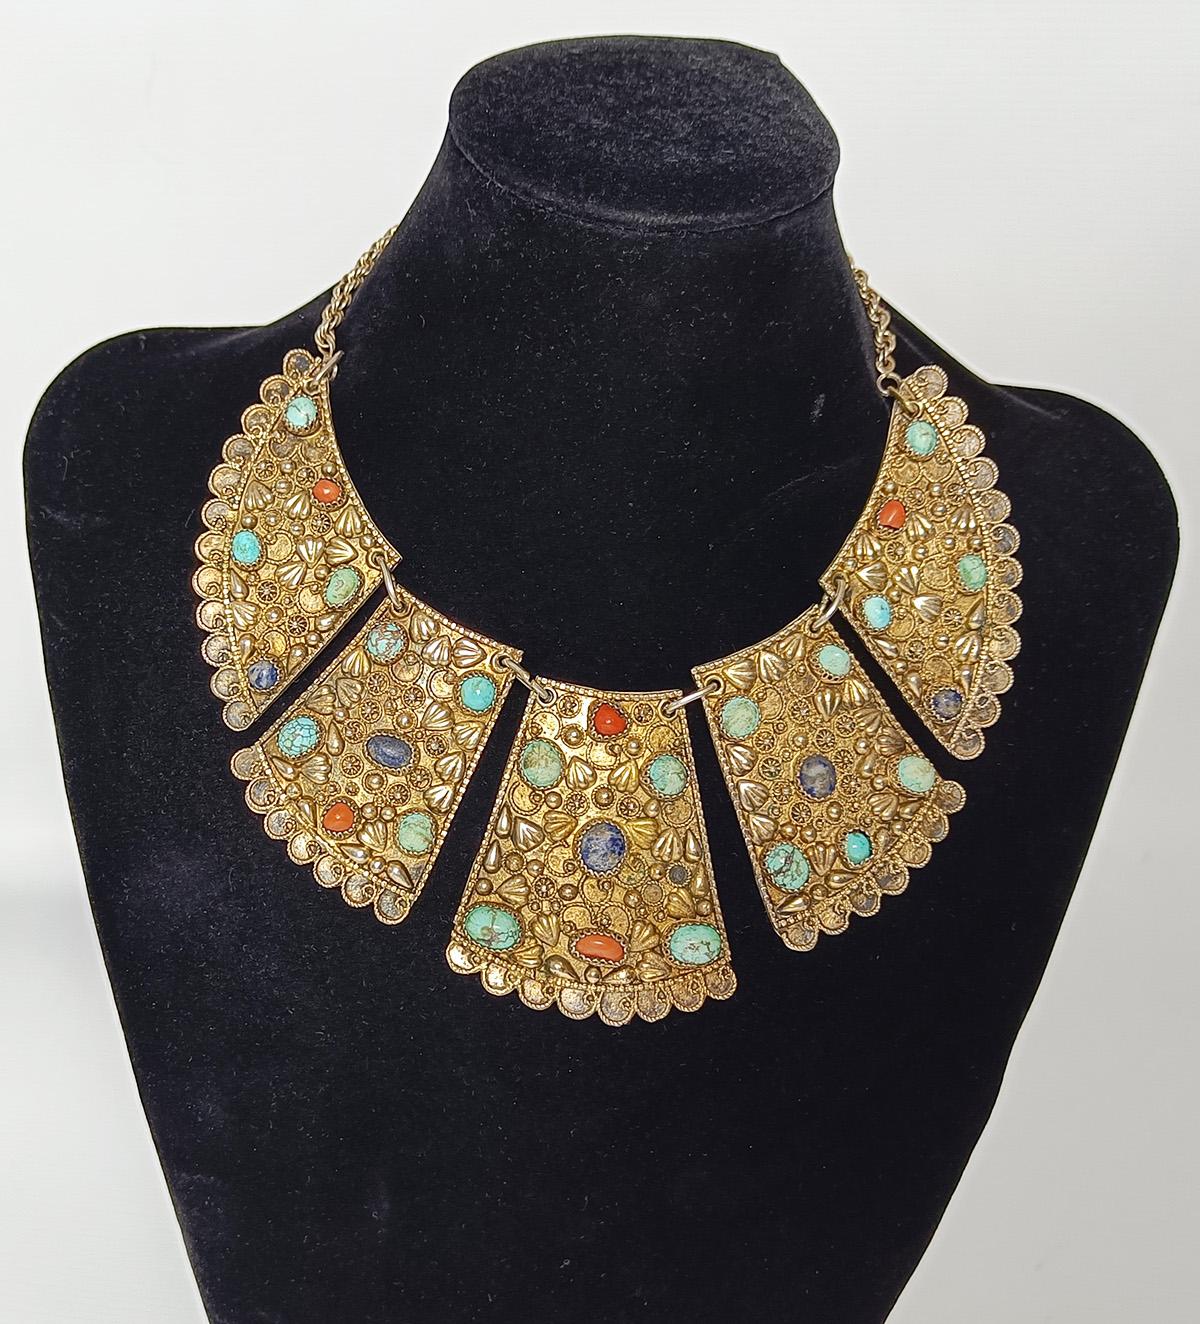 Silver gold gilt Persian bib necklace with turquoise Middle Eastern Antiques
A Highly detailed gold gilt metal Persian bib necklace influenced by the ancient style with turquoise and coral stones. 
Round and oval stones in filigree settings.  